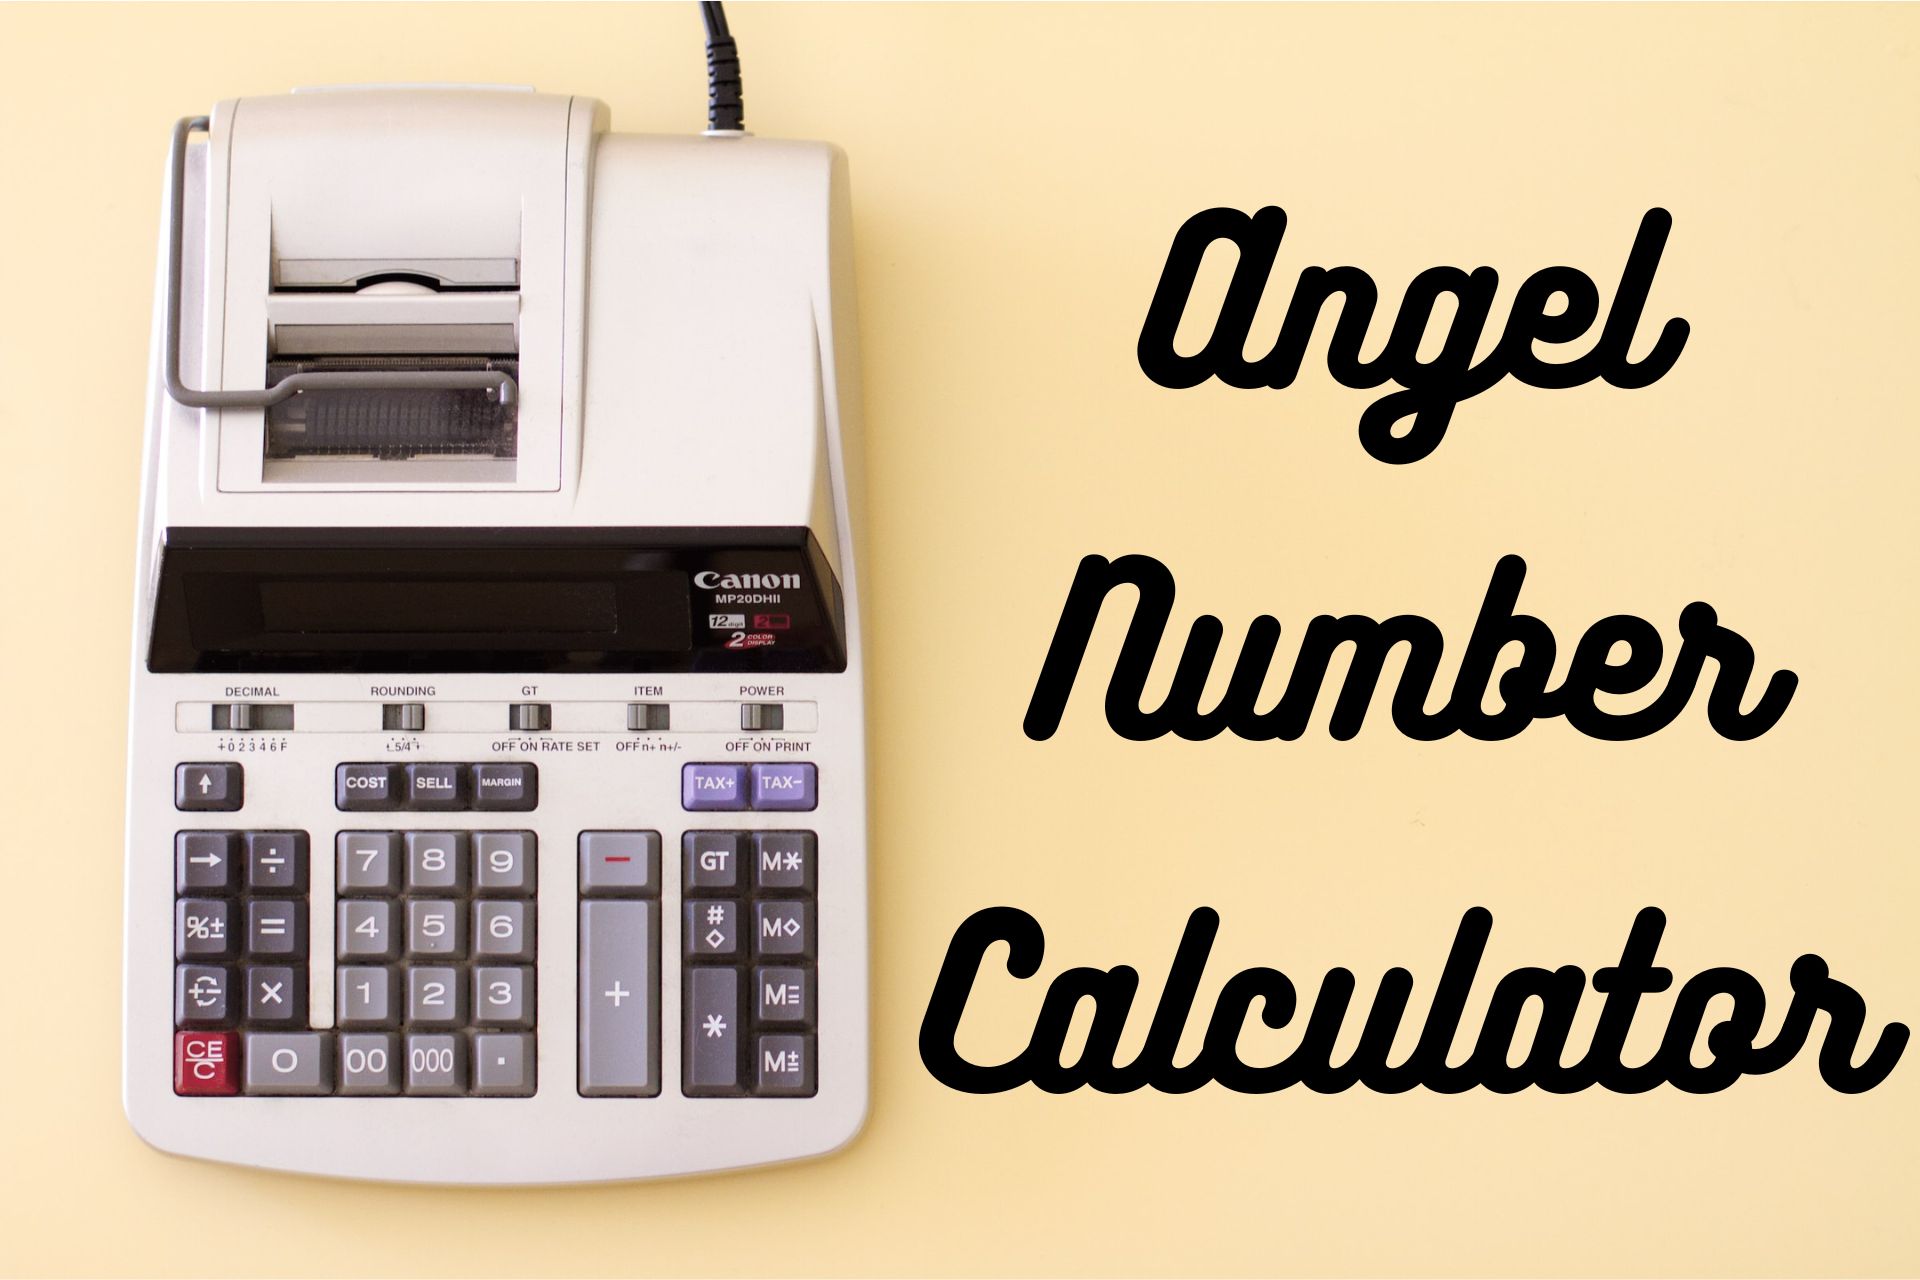 Angel Number Calculator - Using Your Name And Date Of Birth